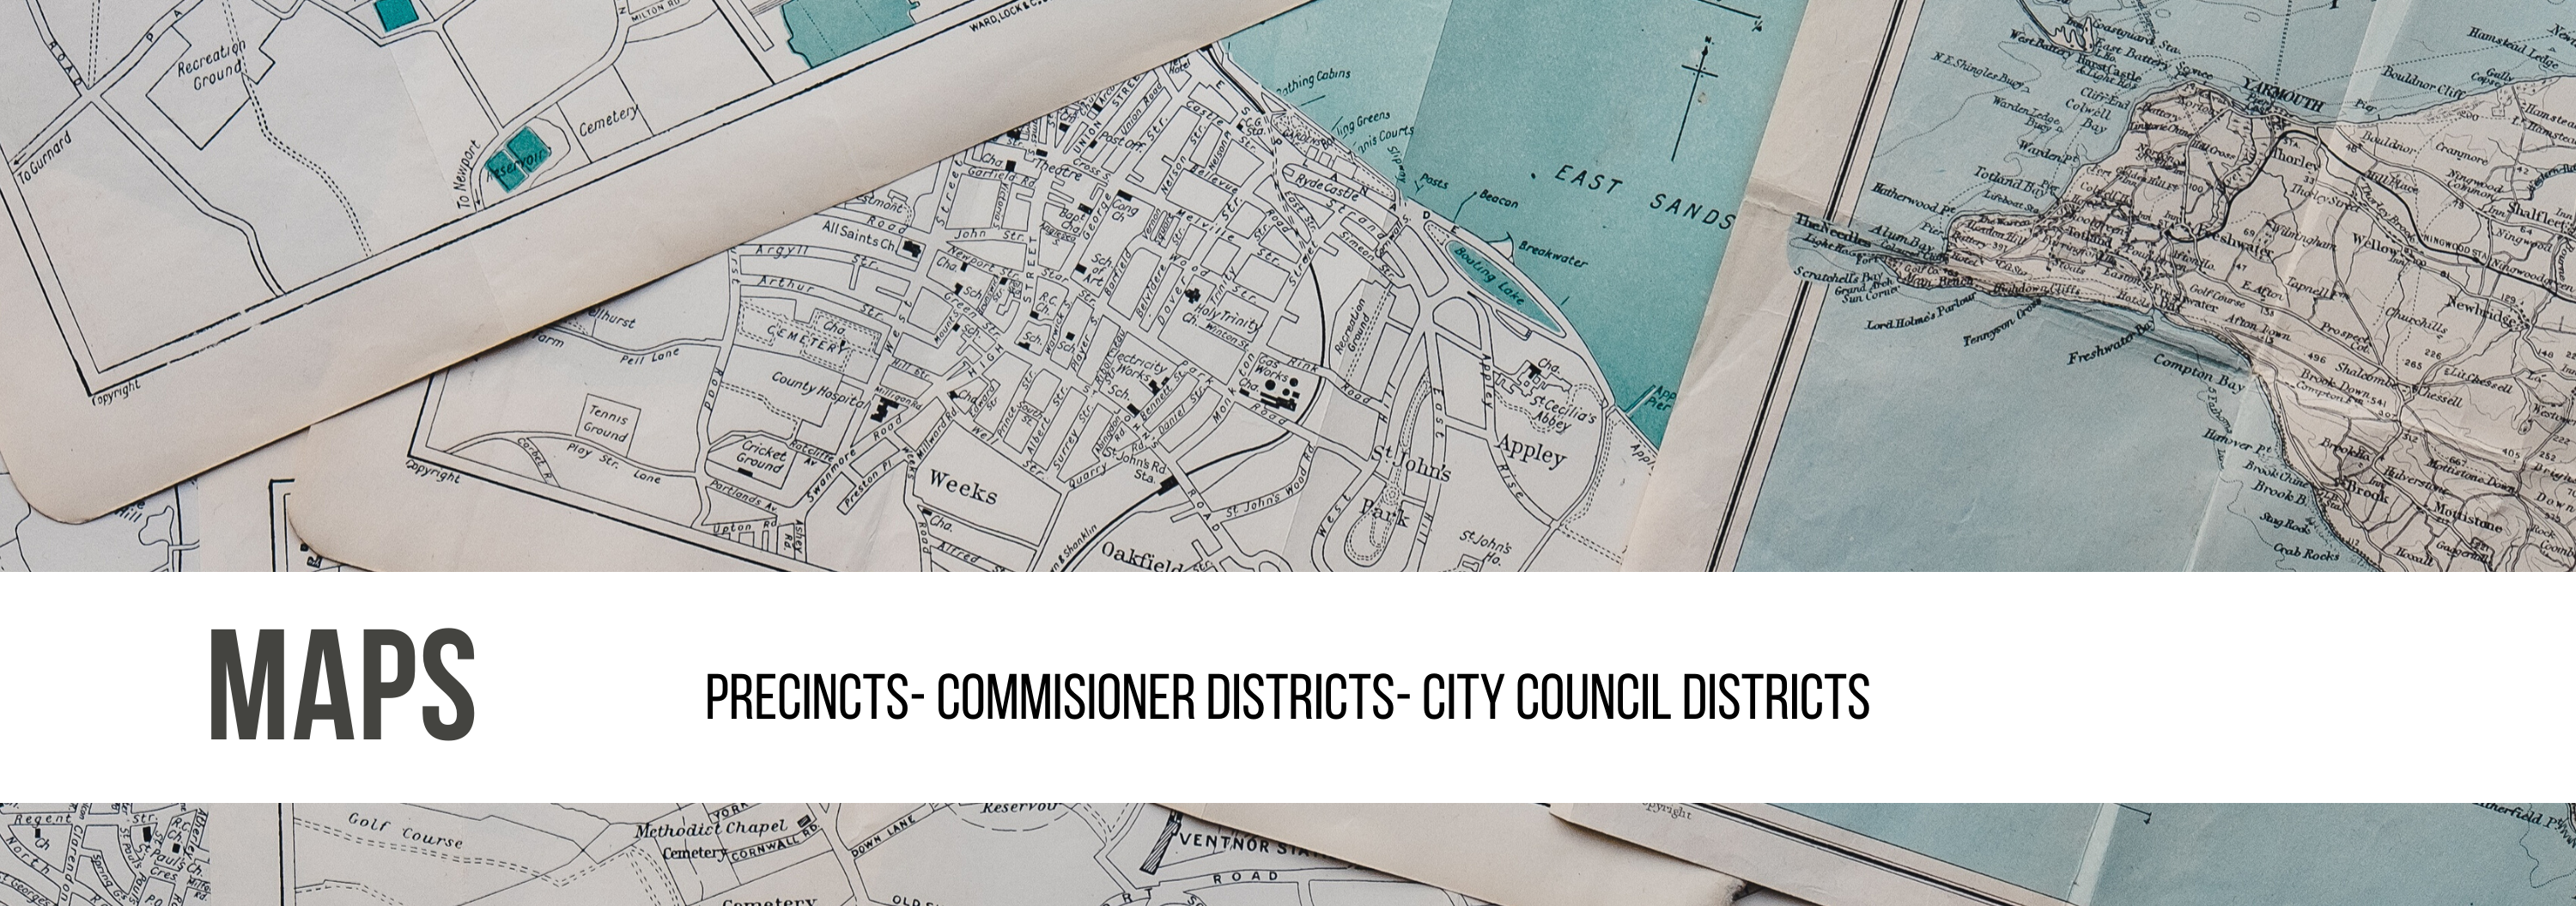 Maps: Precincts - Commissioner Districts - City Council Districts